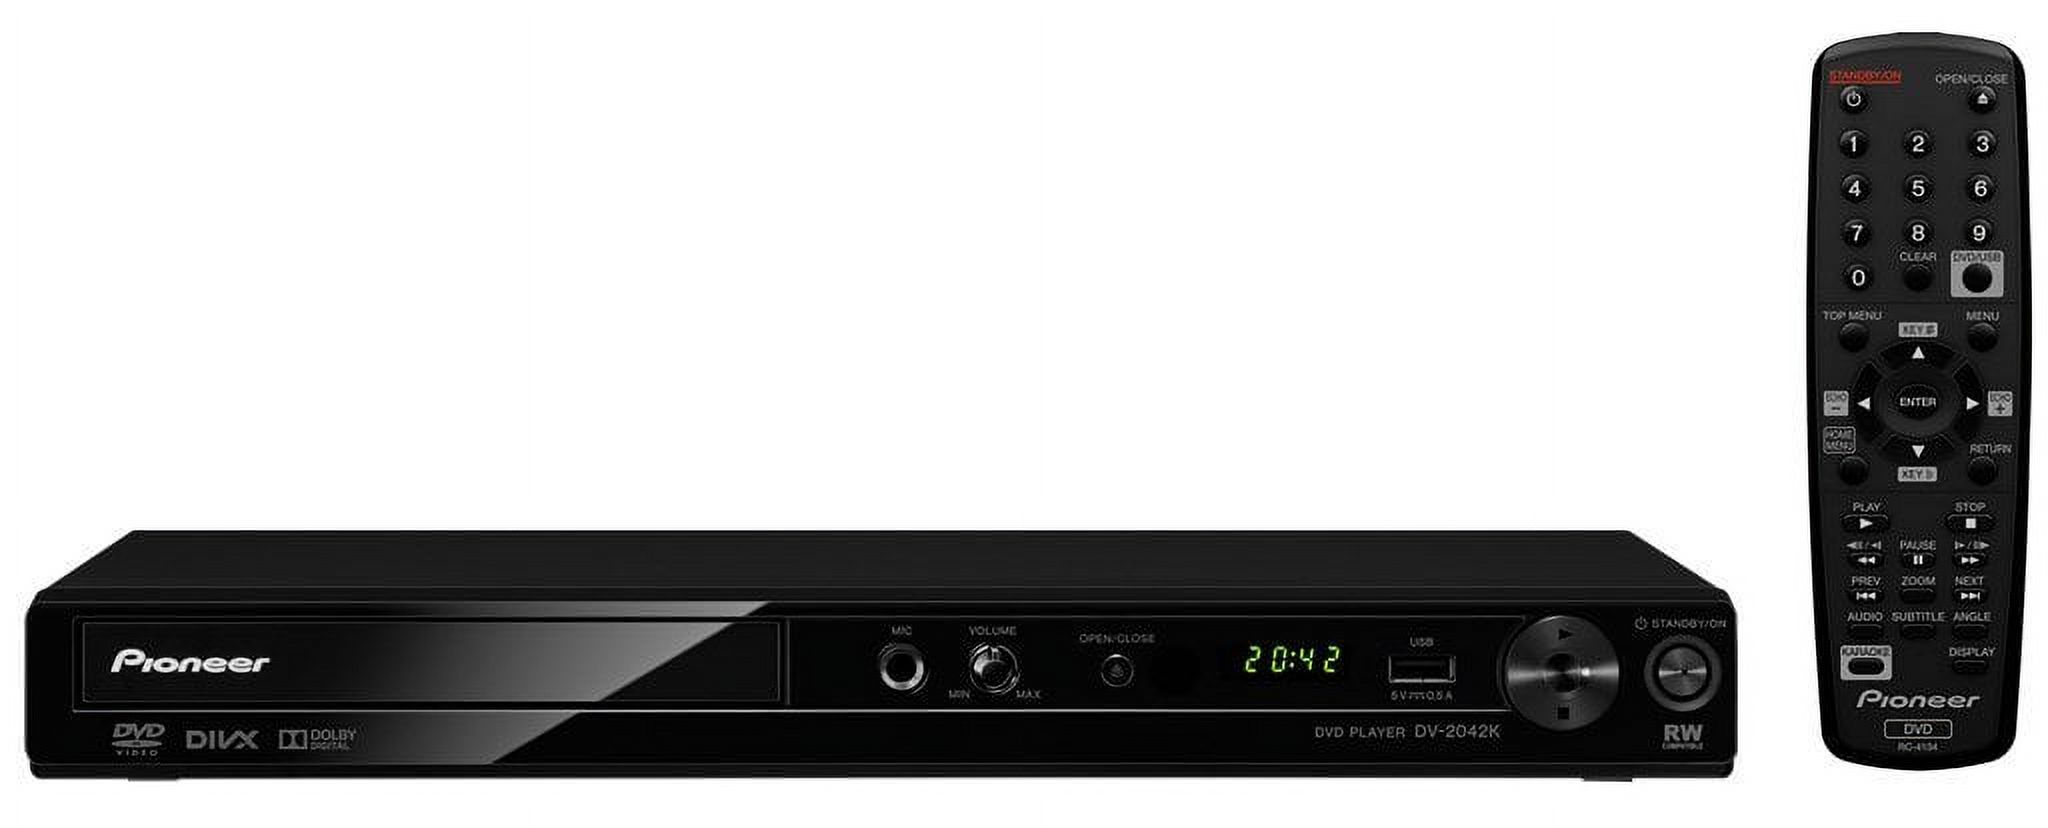 Pioneer DV-2042K 110-240 Volts Multi Region Code Zone Free DVD Player with DivX, Karaoke and USB Input - image 1 of 3